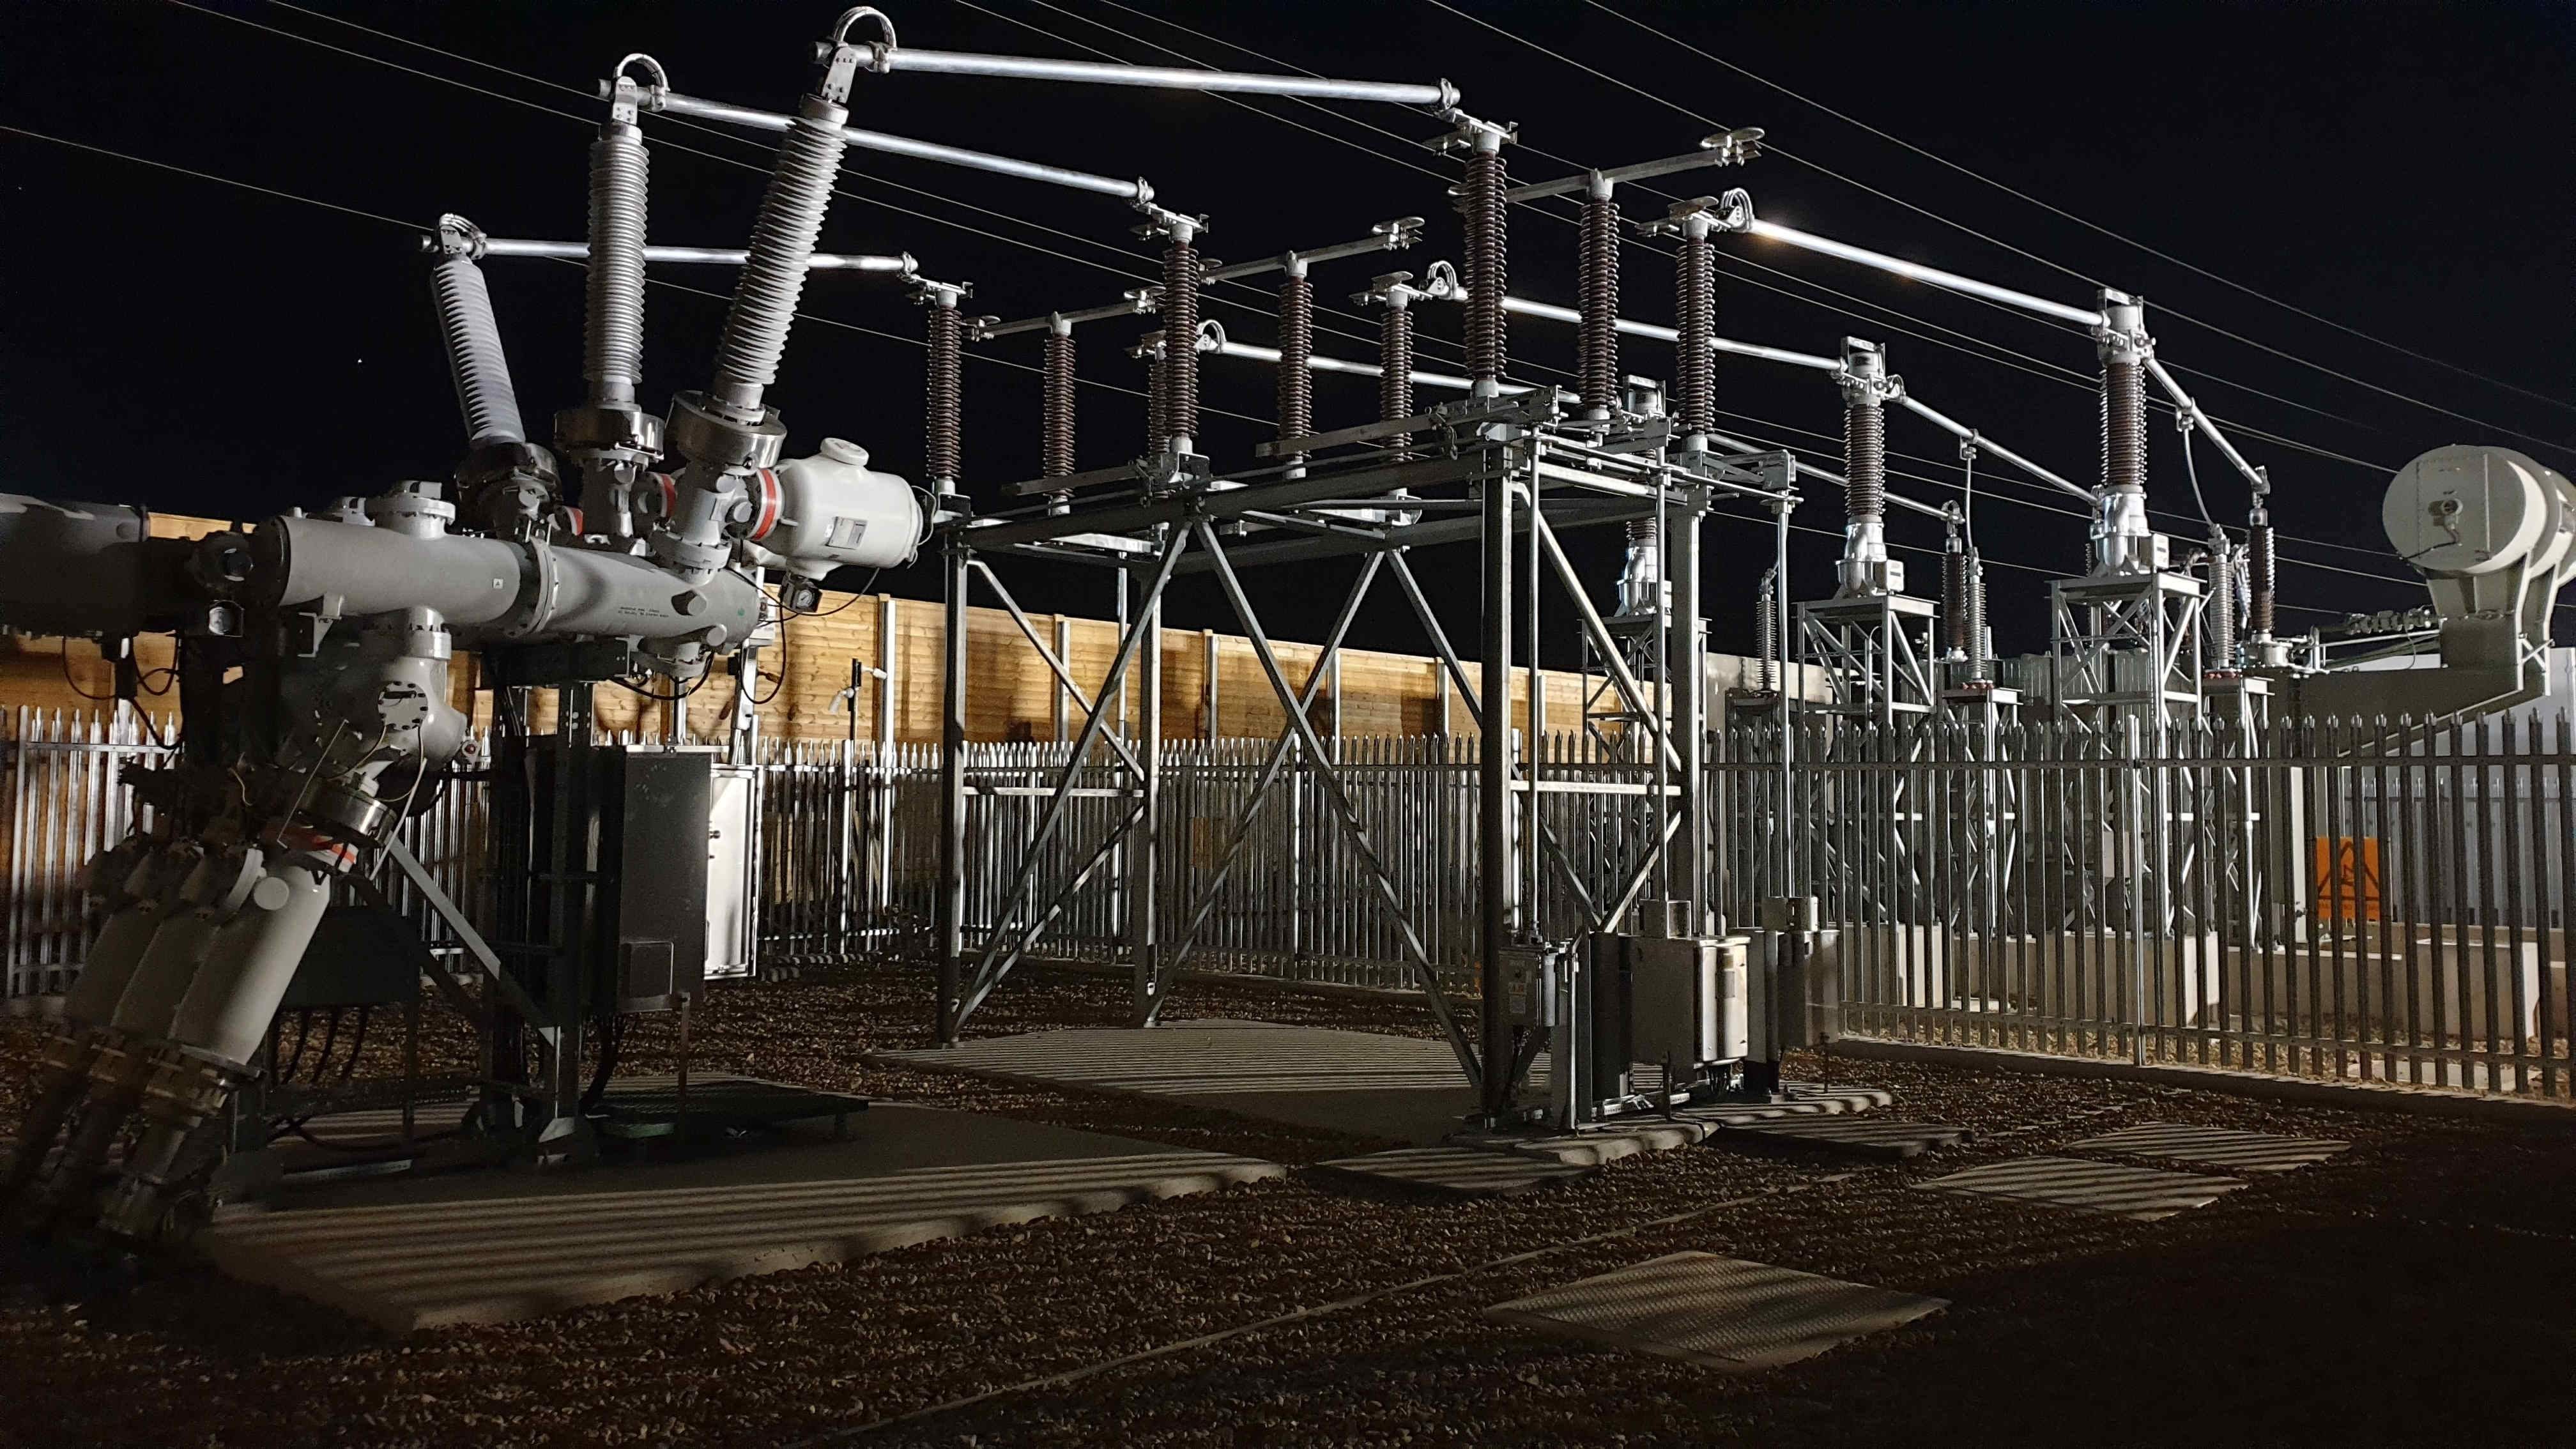 View of an operational energy storage site, illustrating Noriker Power's focus on operations and asset optimization for maximum efficiency